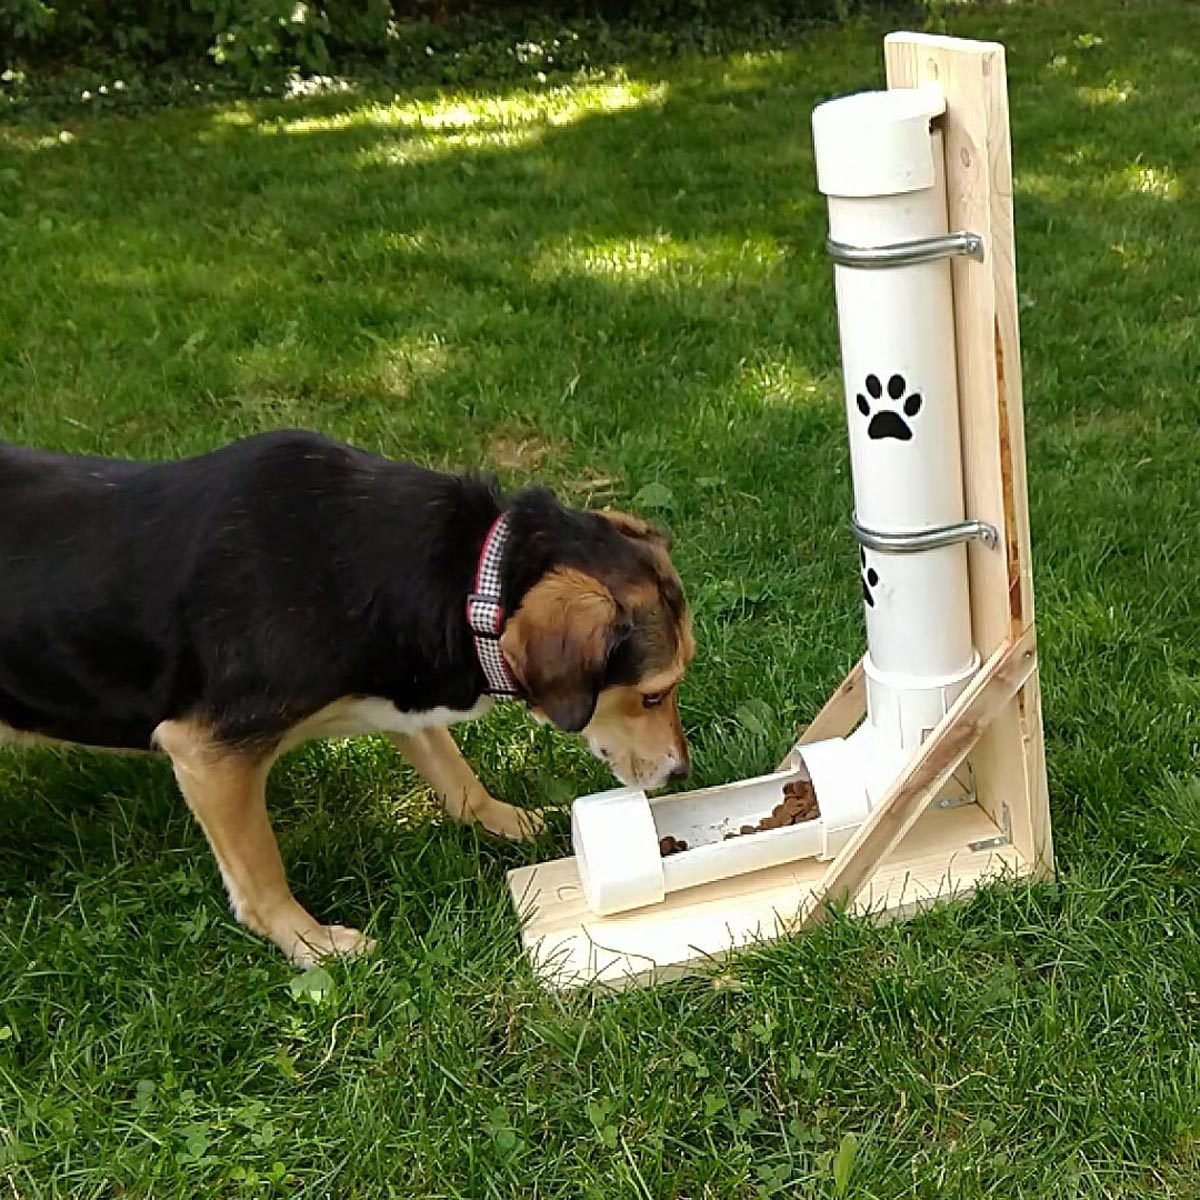 DIY Dog Food Bowl Stand for Small Pups